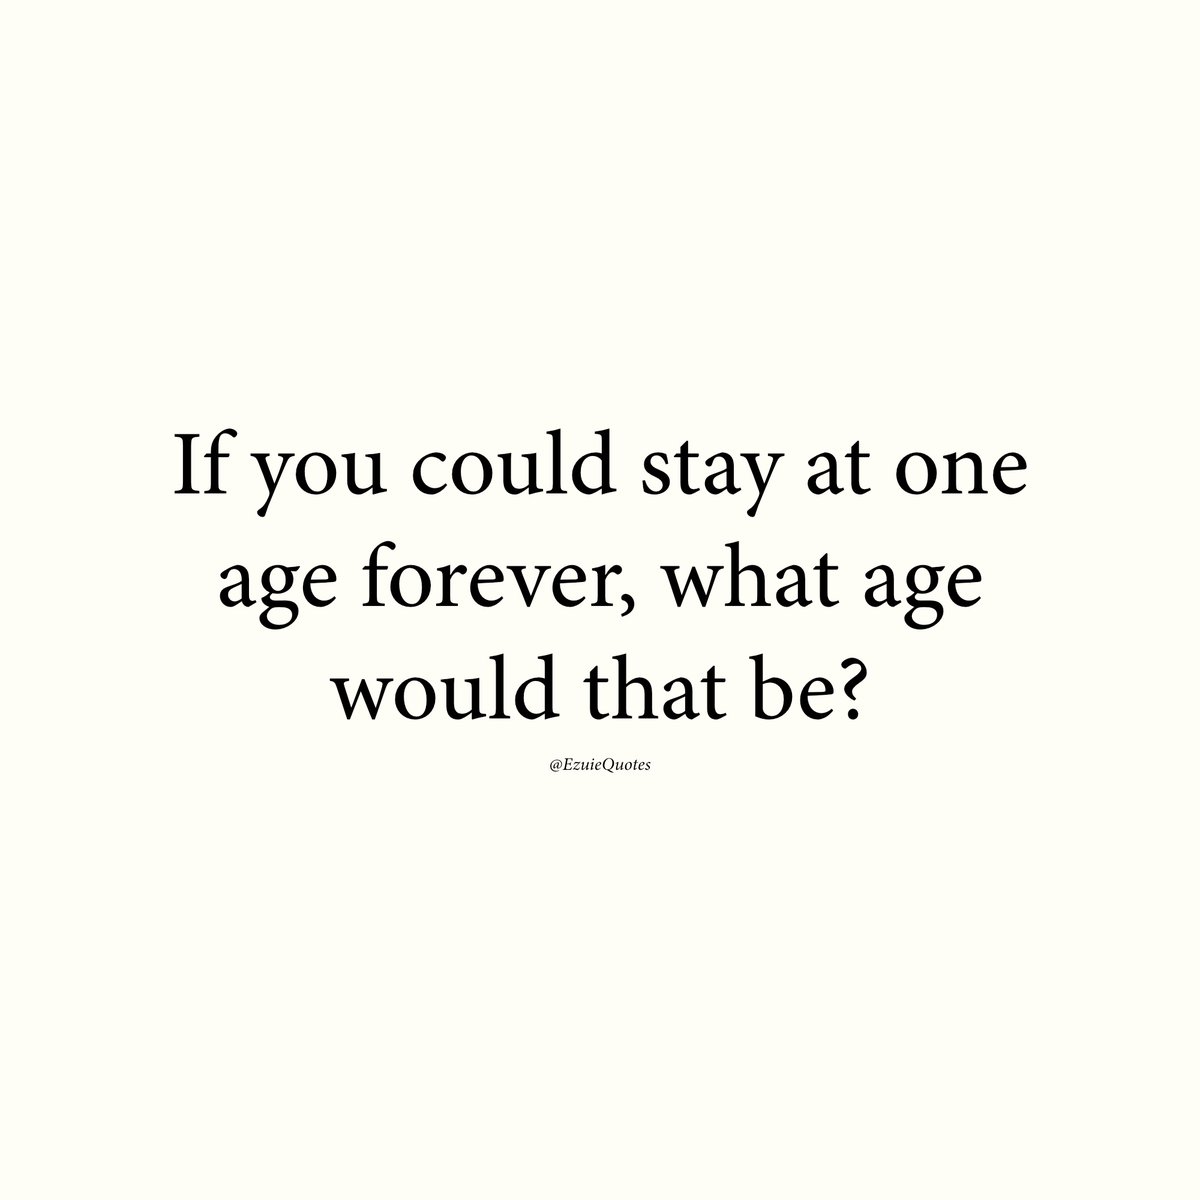 What age